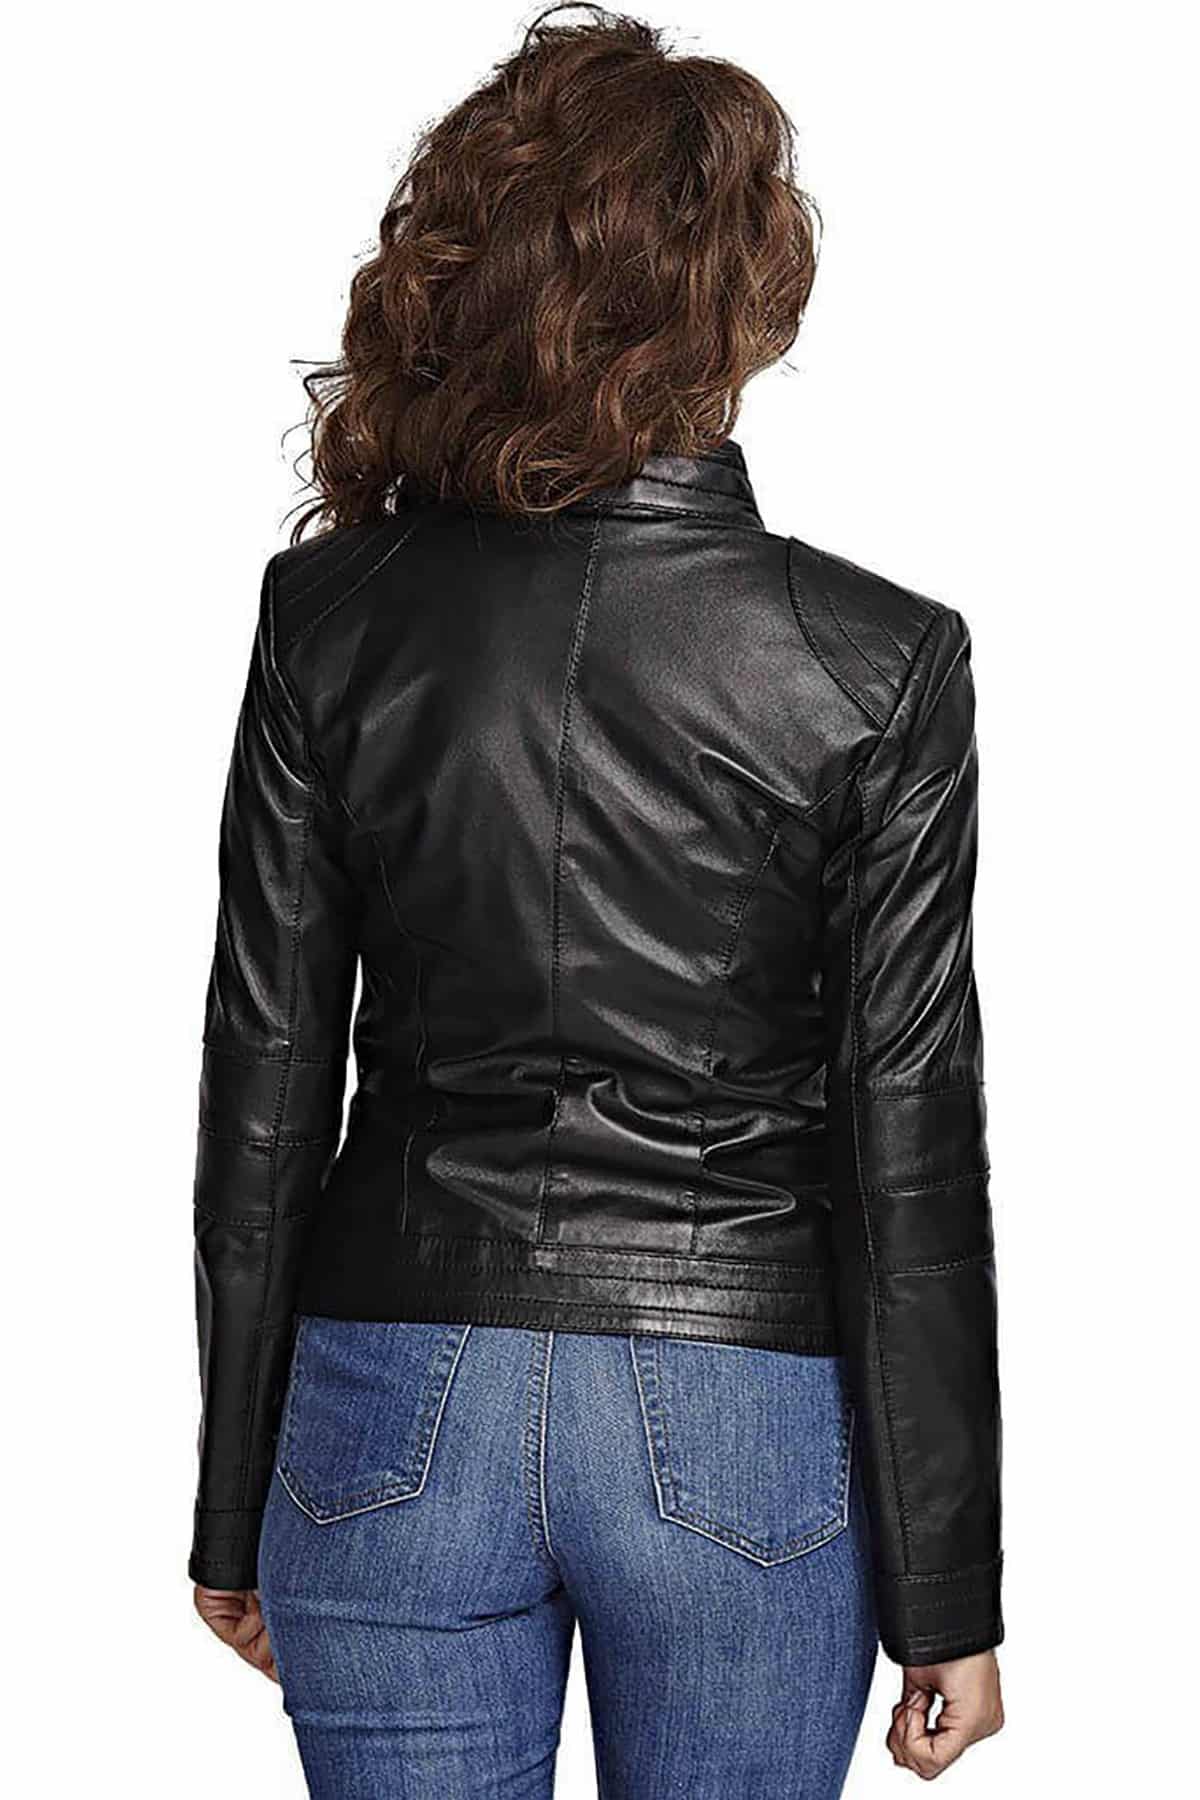 Alexis Women's Leather Pants – Extreme Biker Leather